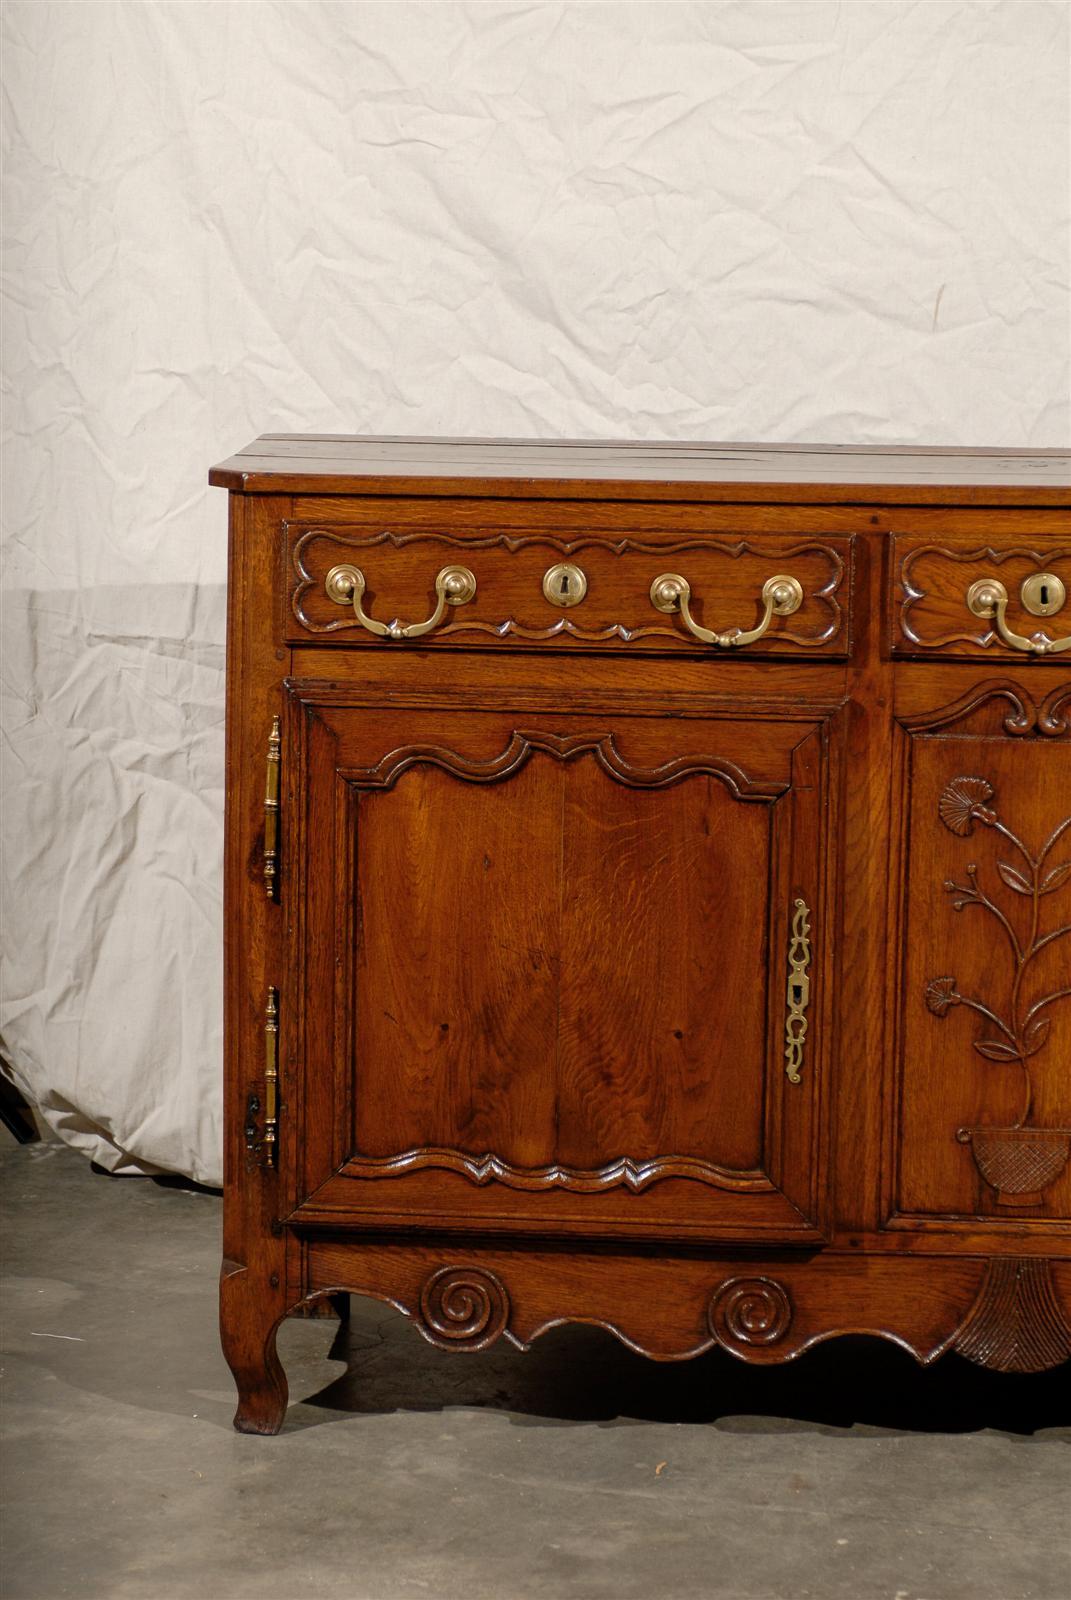 19th century Louis XV Style French Buffet with two Doors and three drawers, fruitwood, great detail.